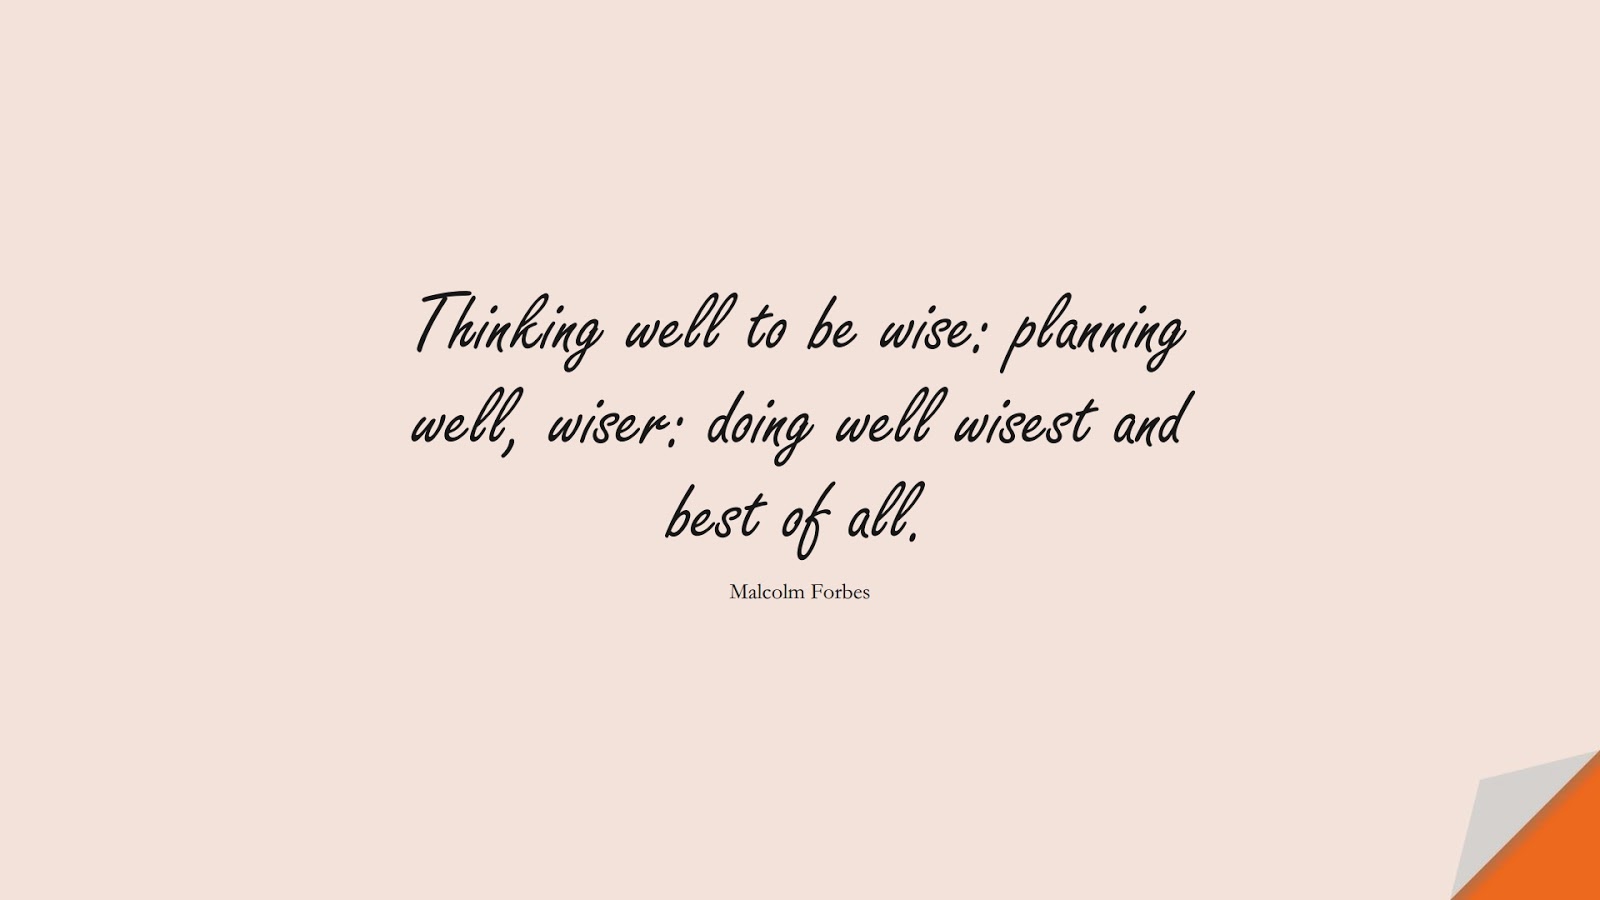 Thinking well to be wise: planning well, wiser: doing well wisest and best of all. (Malcolm Forbes);  #WordsofWisdom